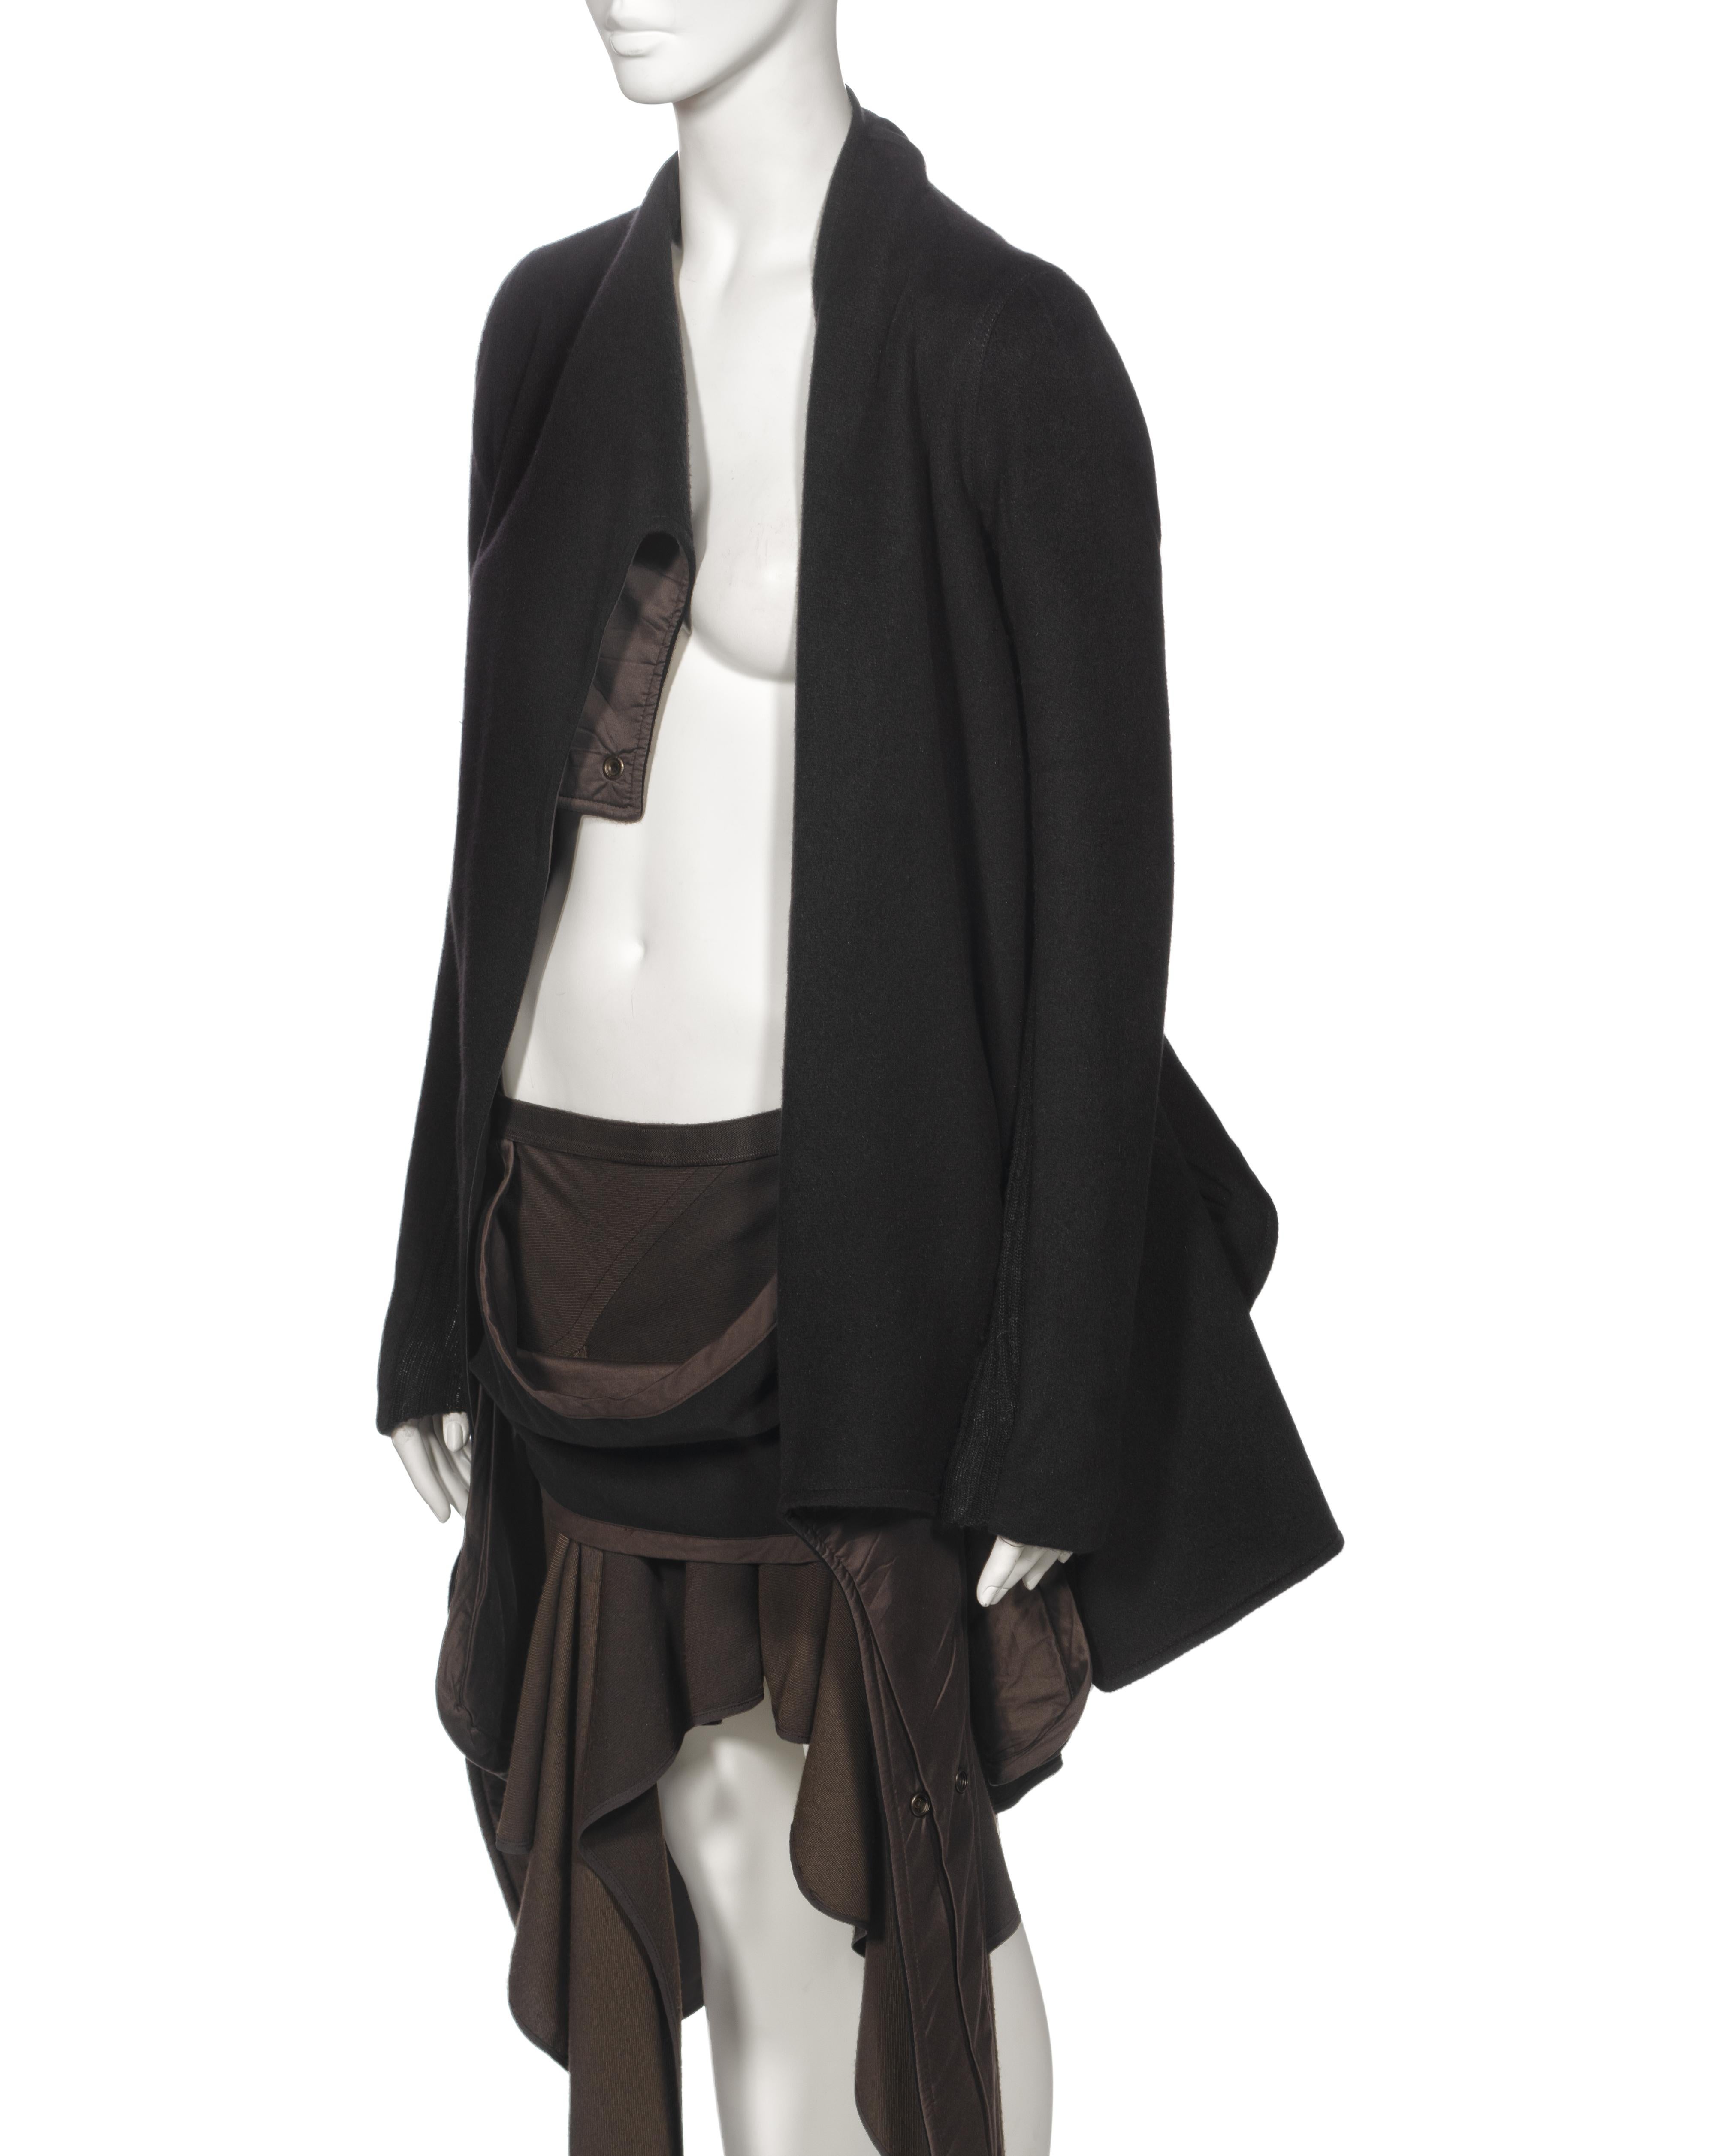 Rick Owens Angora Jacket and Cashmere Skirt 'Queen' Ensemble, fw 2004 For Sale 6